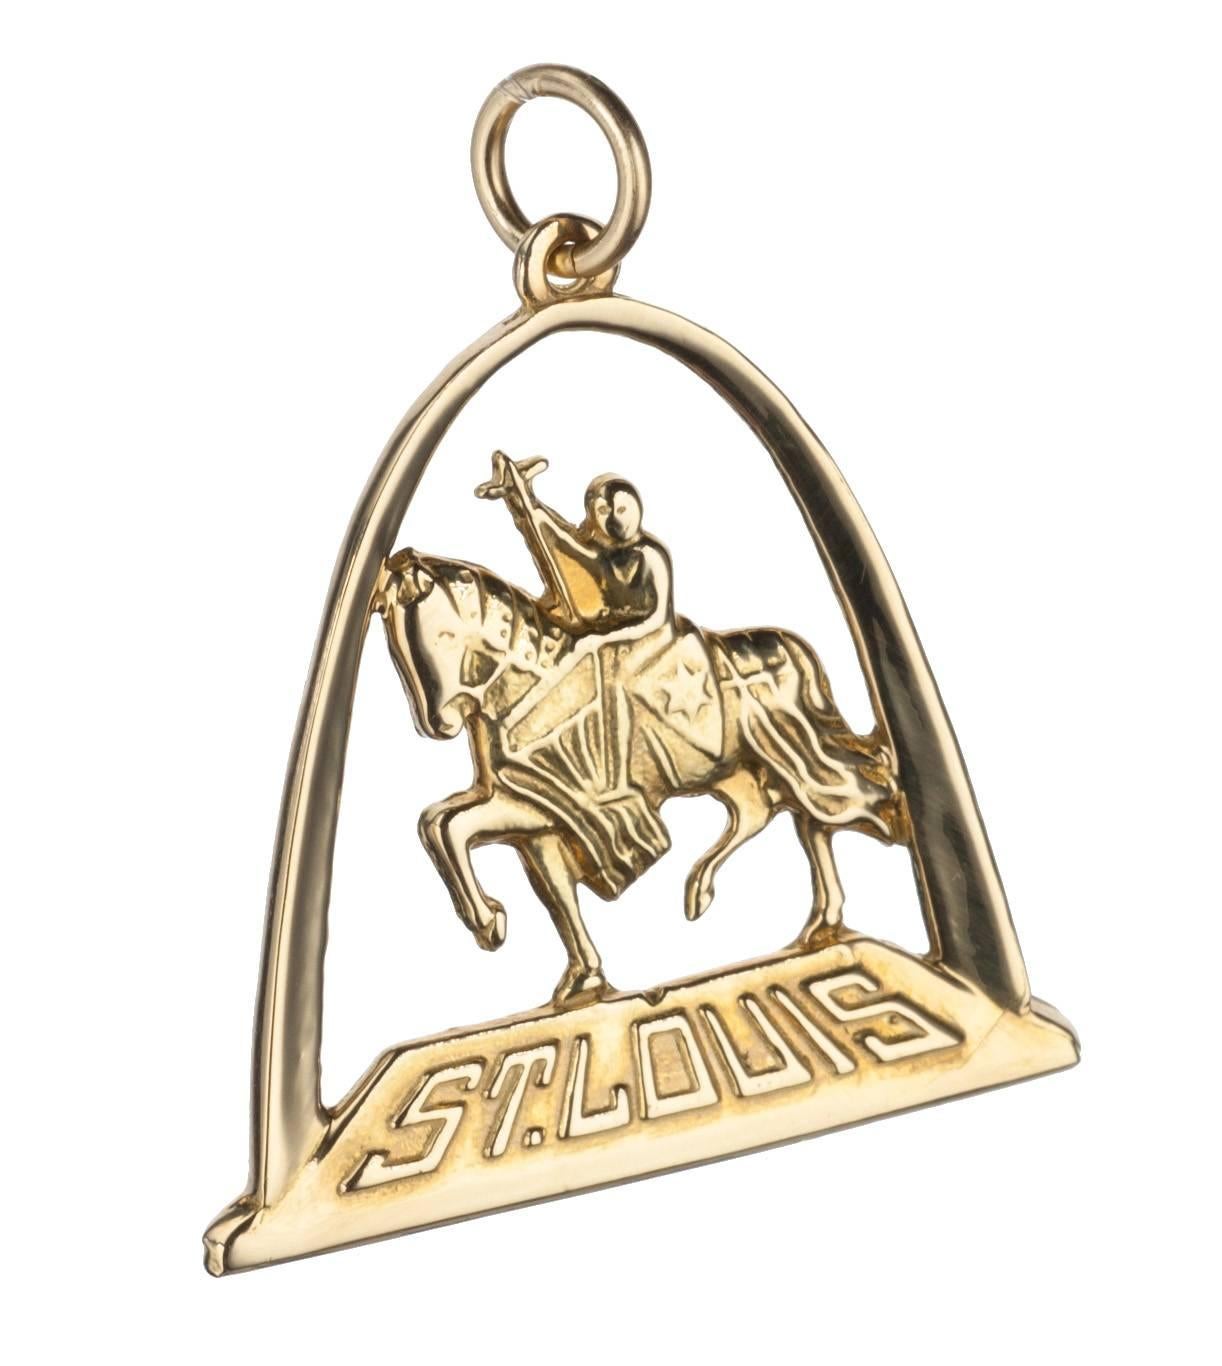 Modelled after the ‘Apotheosis of St. Louis’ statue located in front of the St. Louis Art Museum, a charm in 18-karat yellow gold featuring the figure of Saint Louis posing under the Gateway Arch. Jump ring included. Measures approx. 1.25” long by